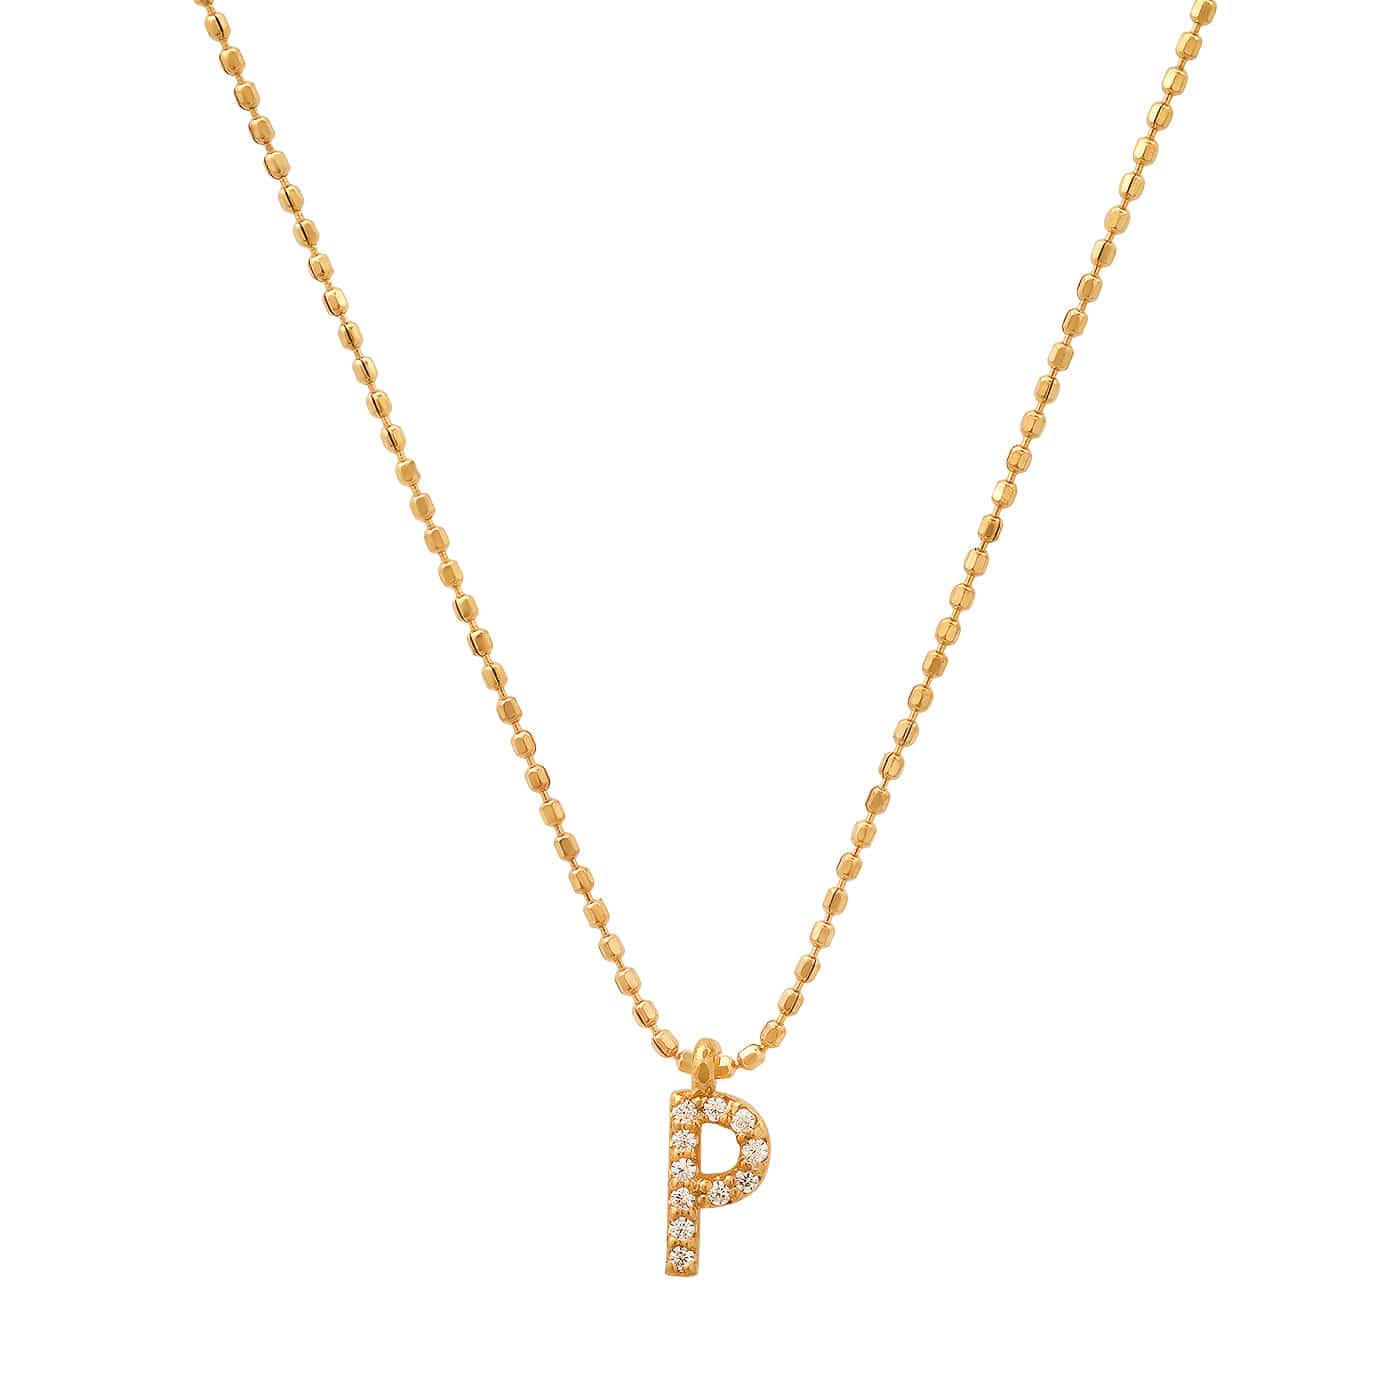 TAI JEWELRY Necklace P Pave Initial Ball Chain Necklace